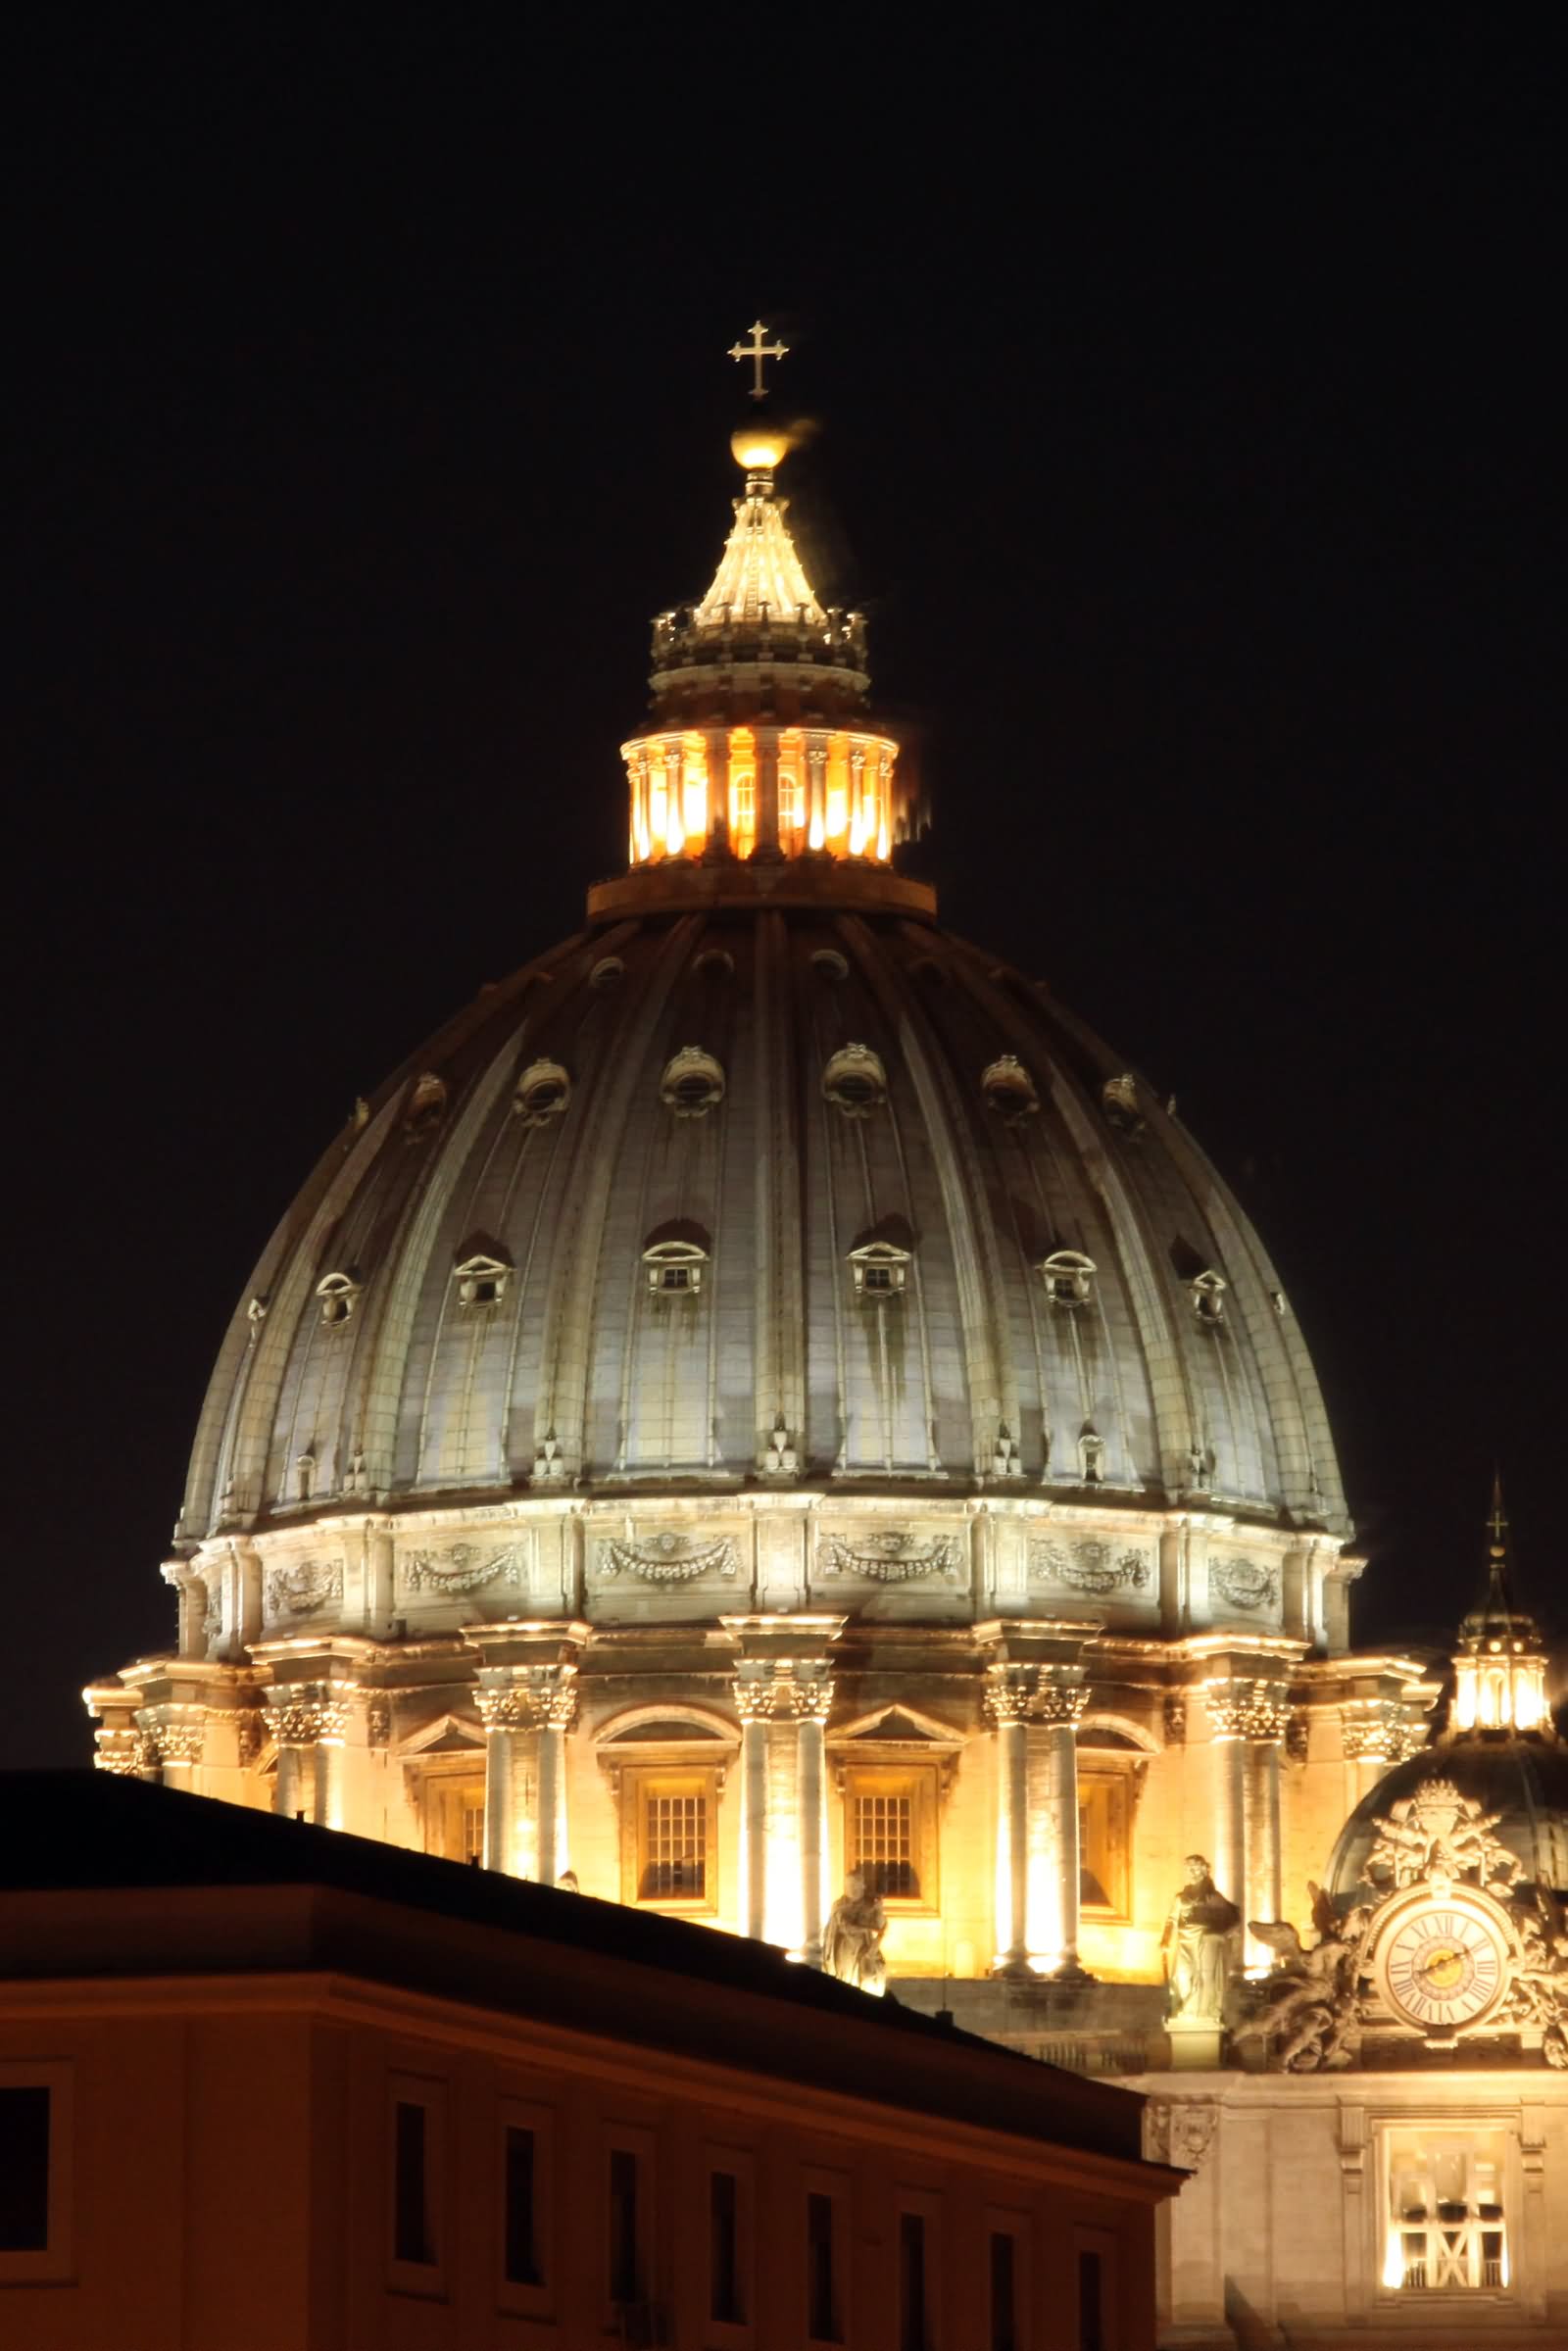 St. Peter's Basilica Dome Night View